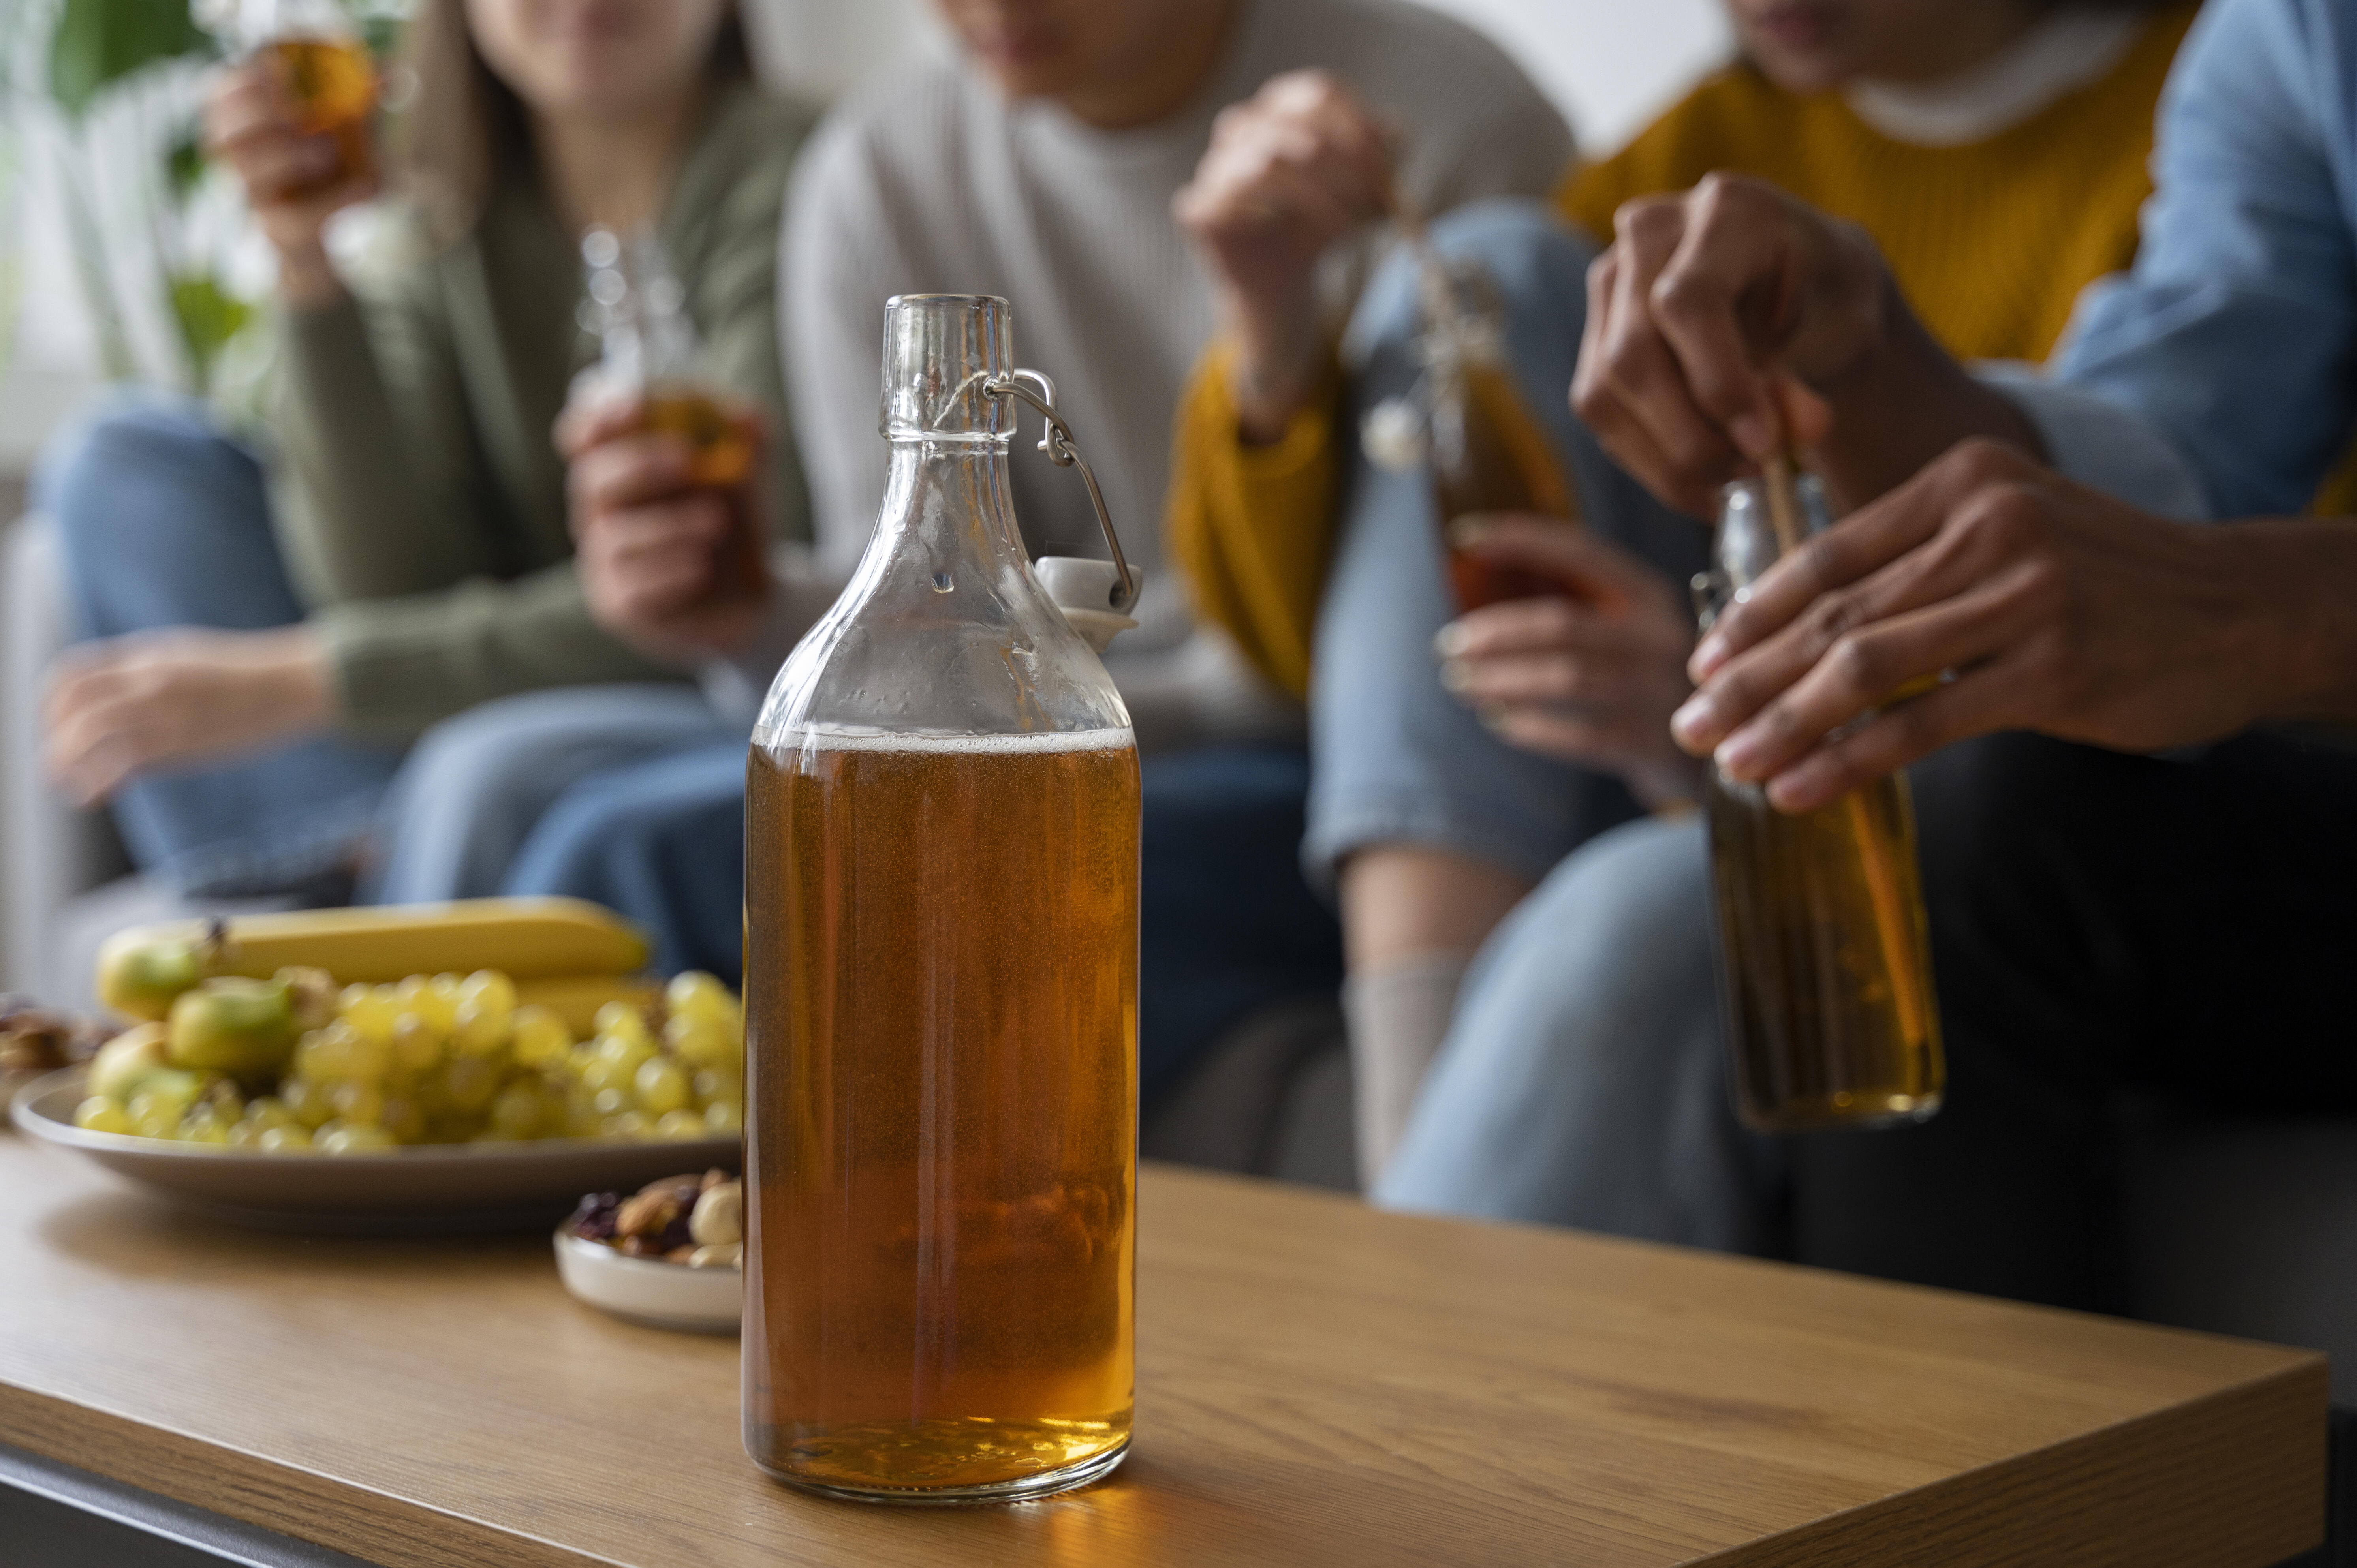 cider fermentation, people trying homemade cider in a glass bottle